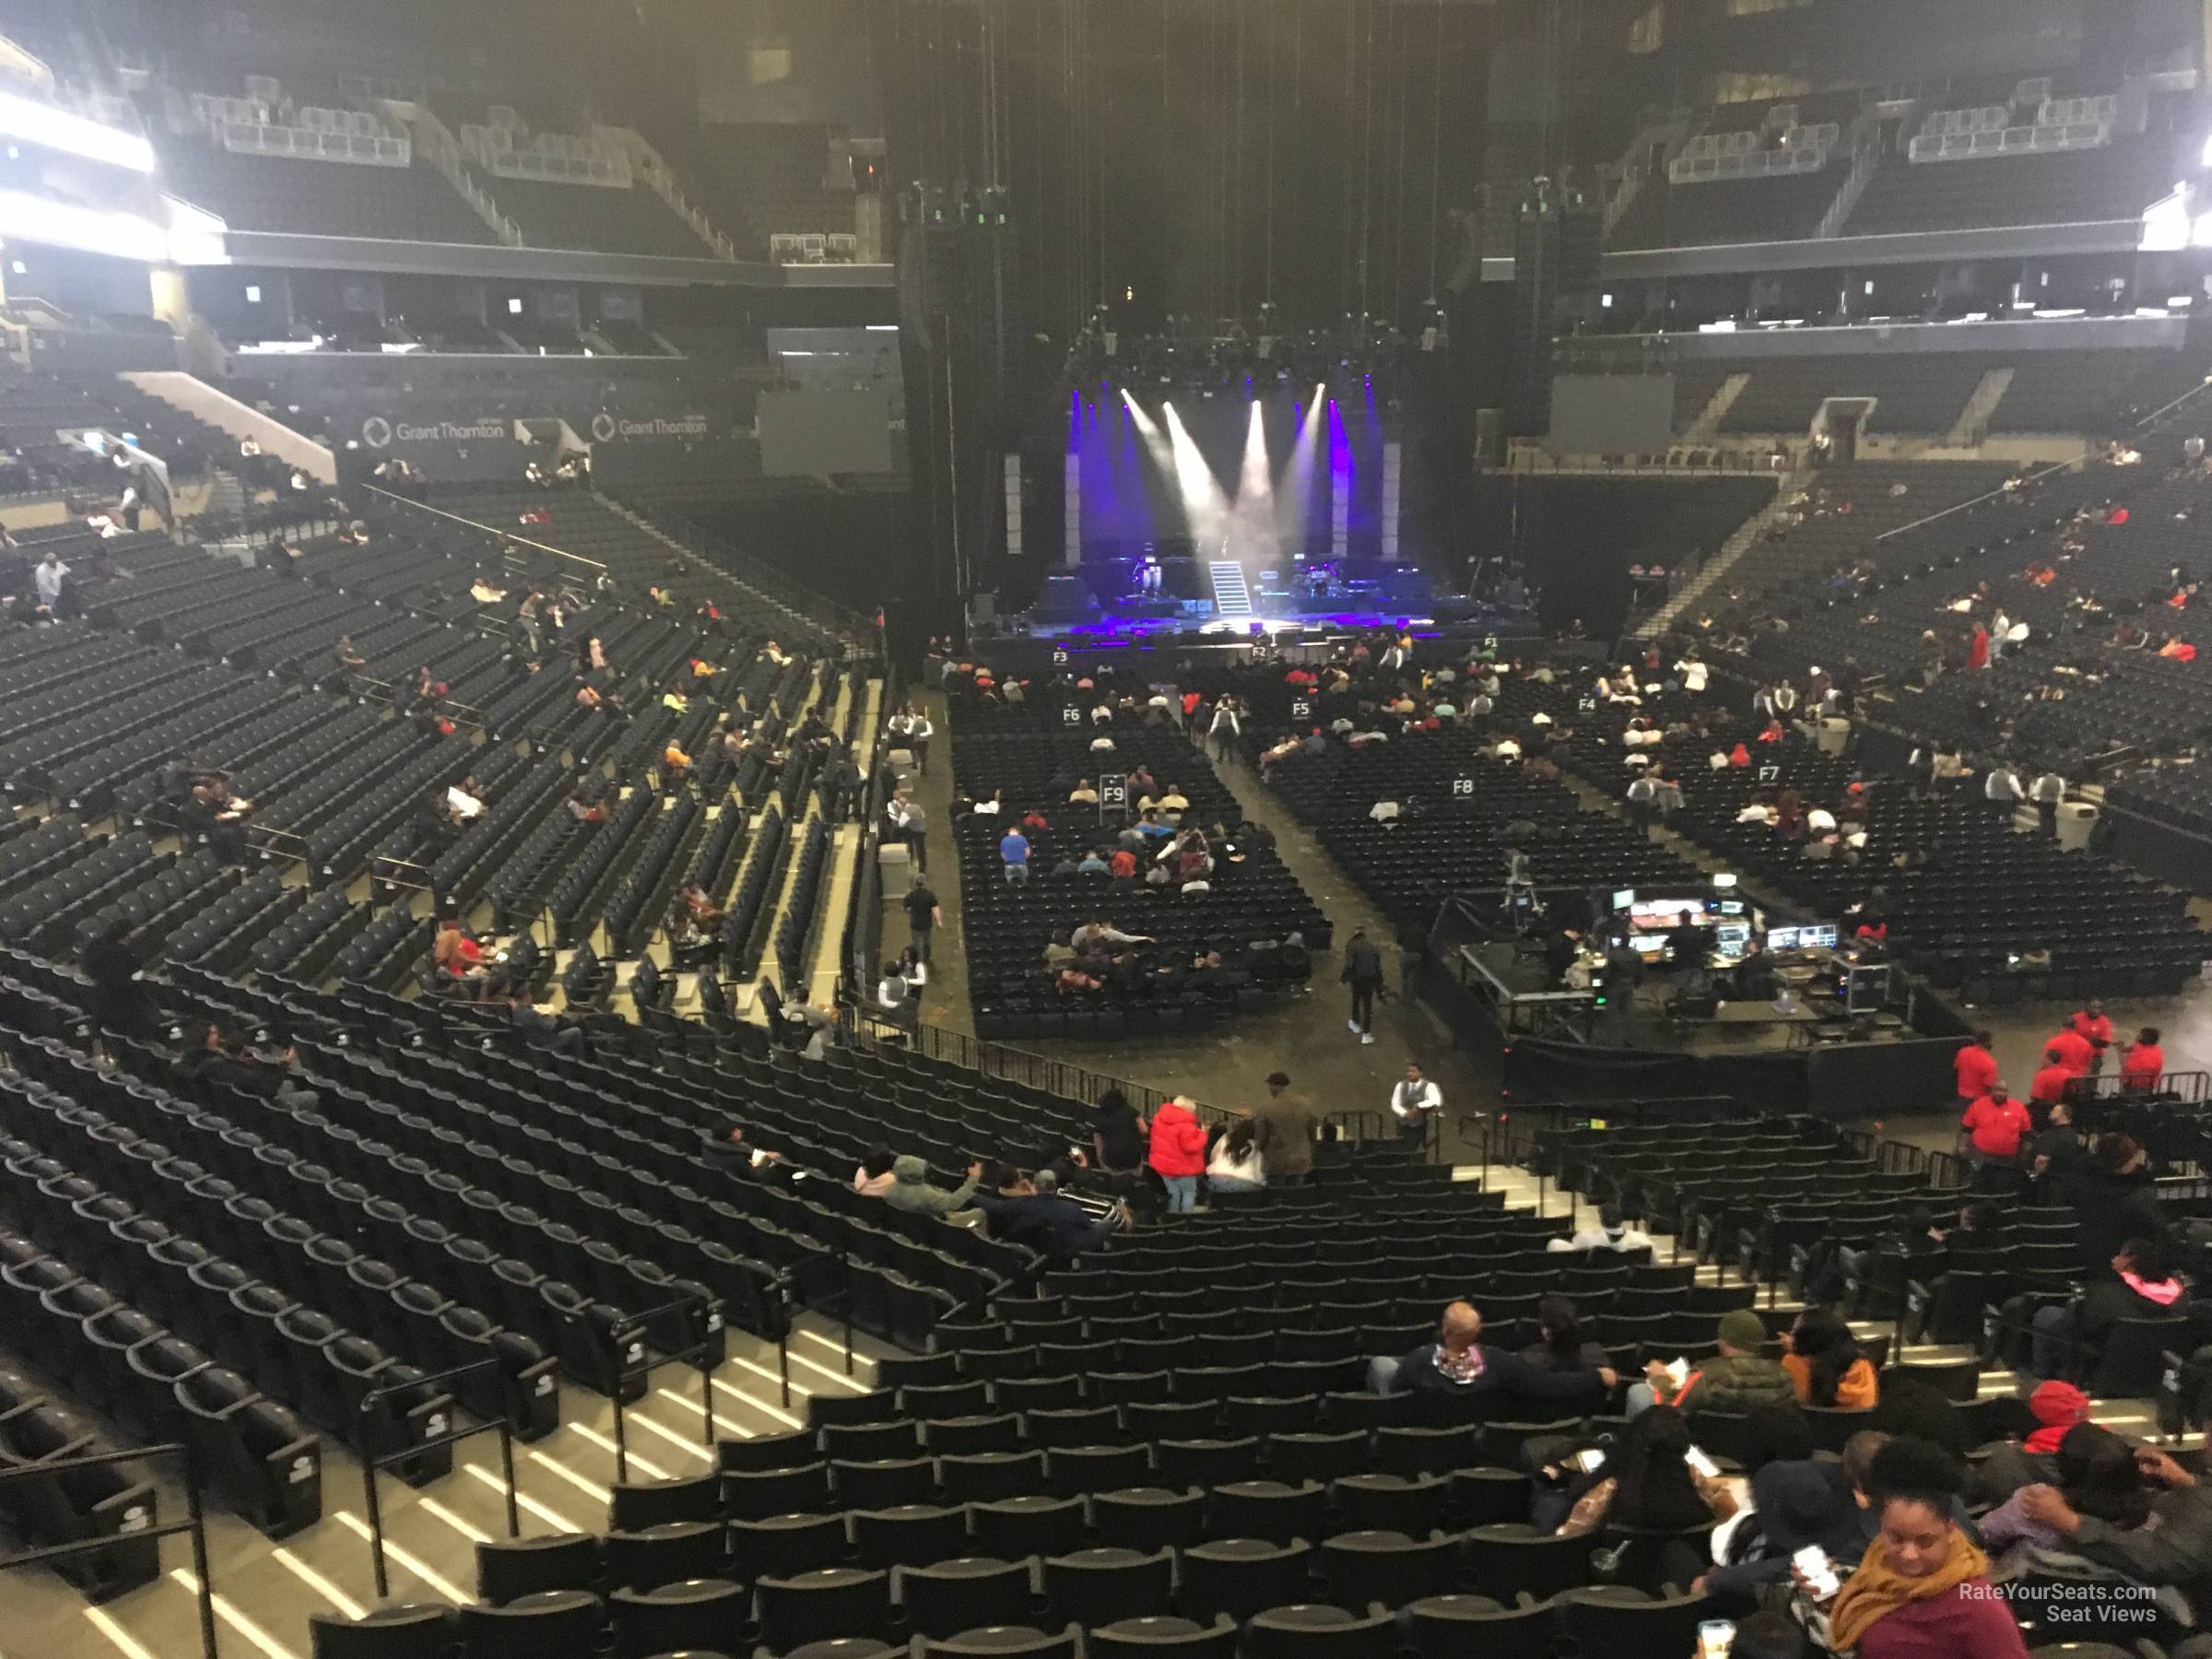 Barclays Center Section 117 Concert Seating - RateYourSeats.com